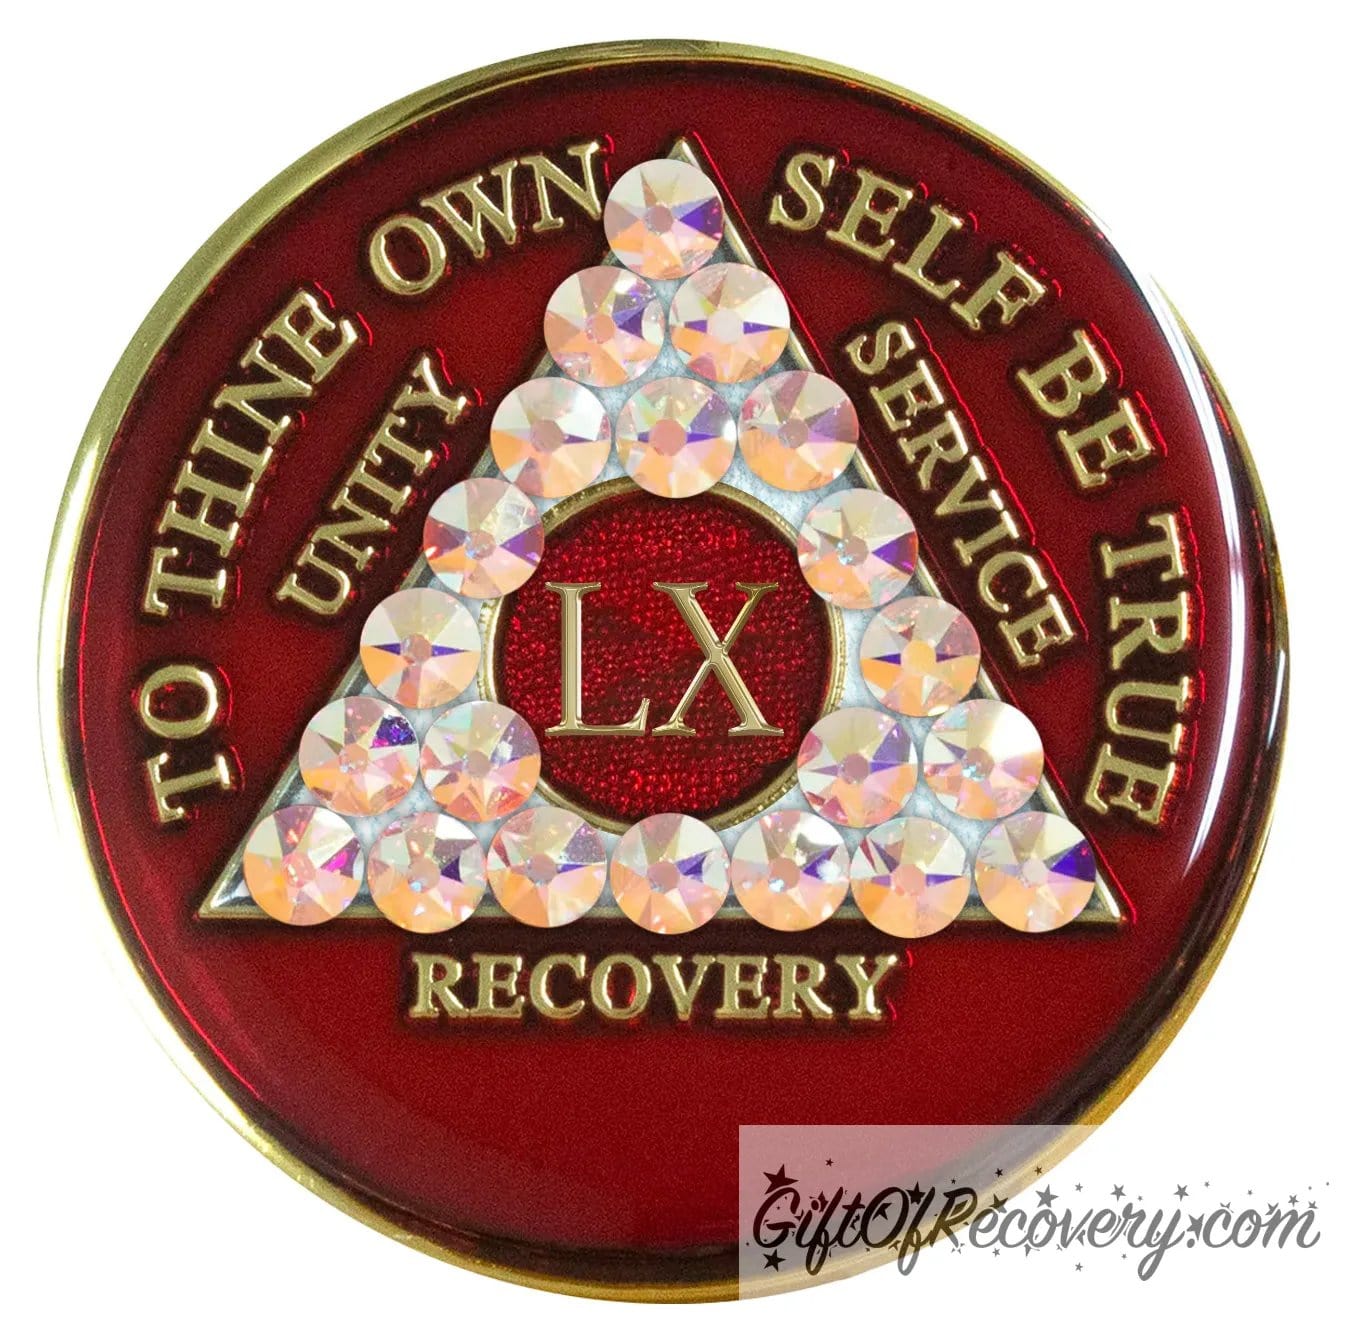 60 year AA medallion ruby red with 21 Aurora Borealis genuine crystals in the shape of the triangle and to thine own self be true, unity, service, recovery, and roman numeral are embossed with 14k gold-plated brass, the medallion is sealed with resin for a shiny finish that lasts.